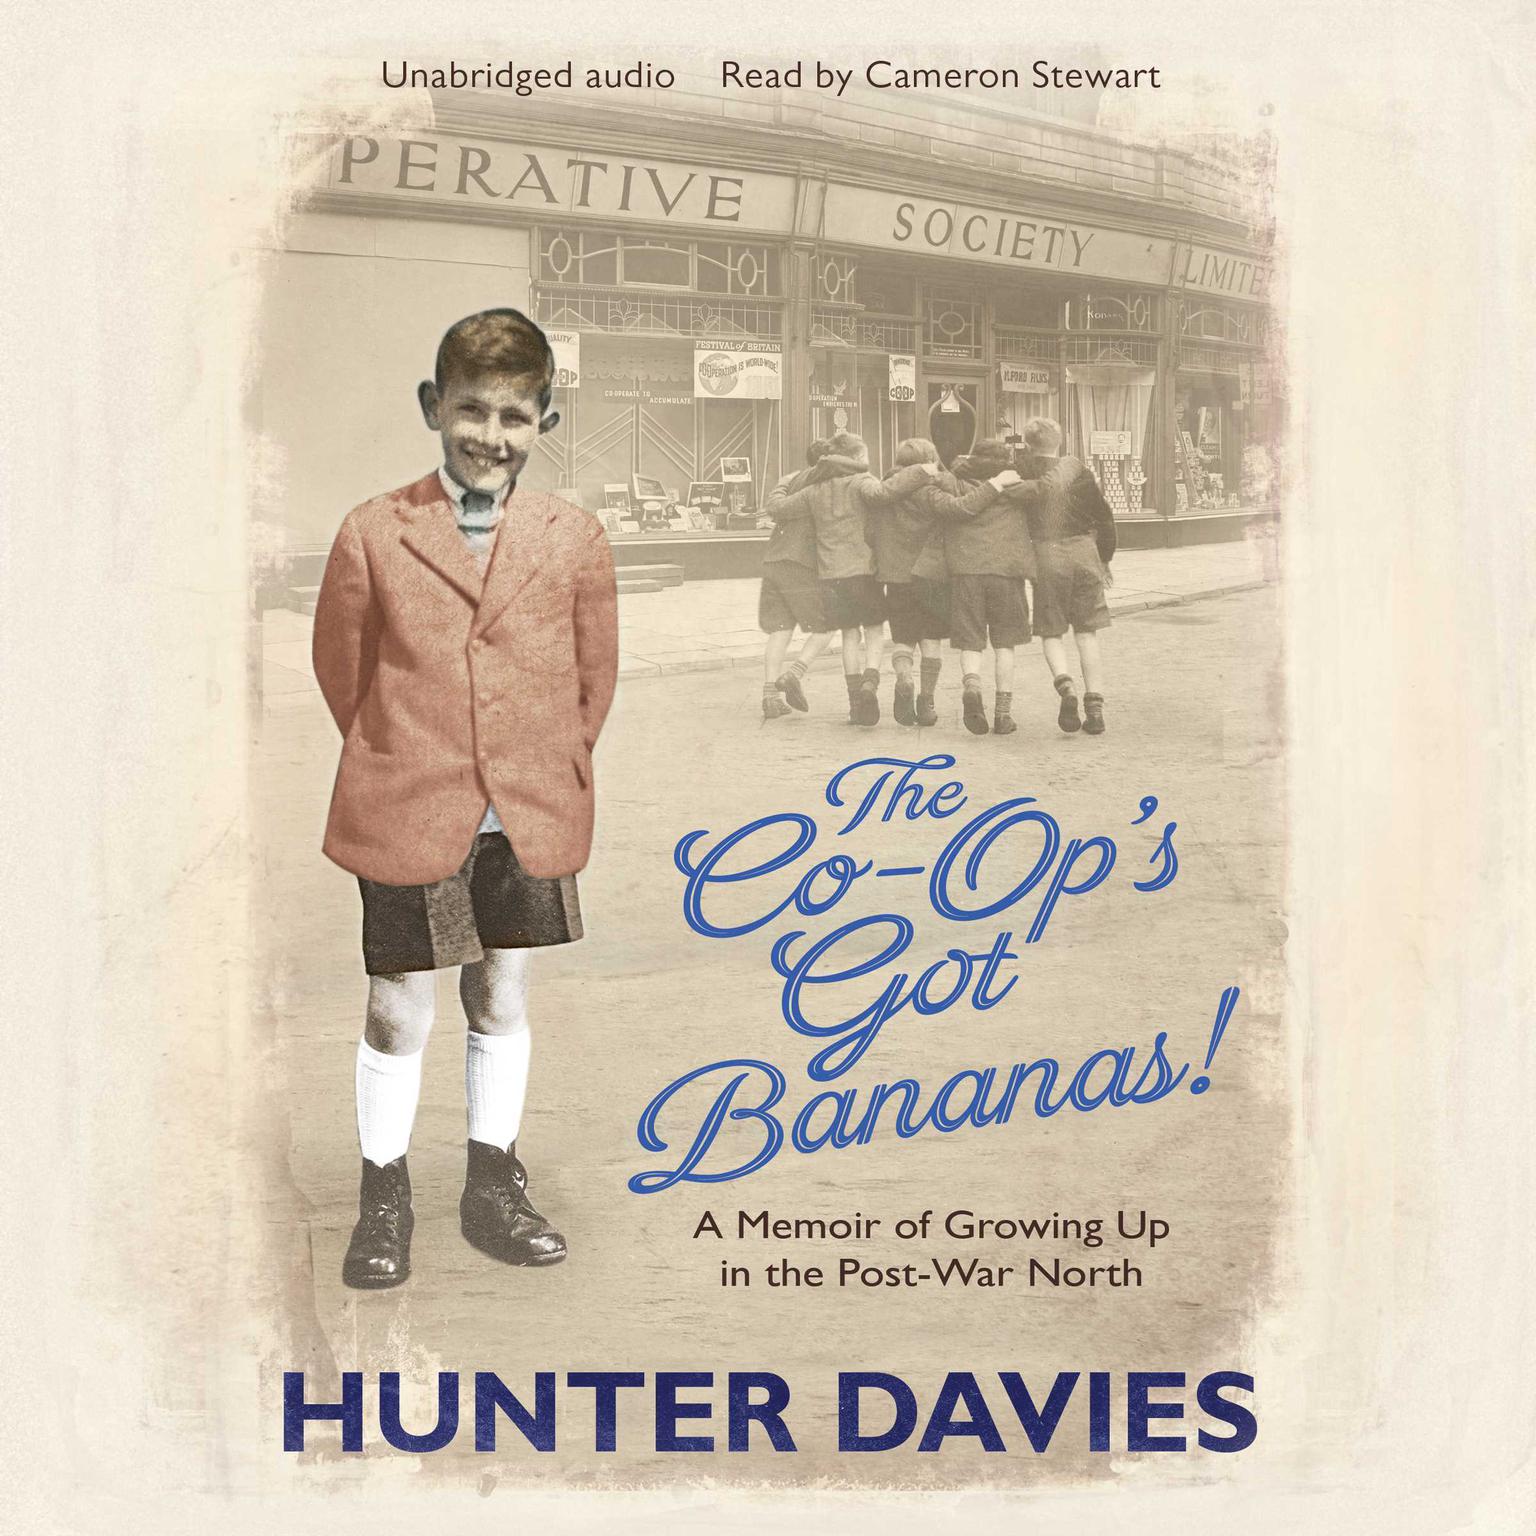 The Co-Ops Got Bananas: A Memoir of Growing Up in the Post-War North Audiobook, by Hunter Davies